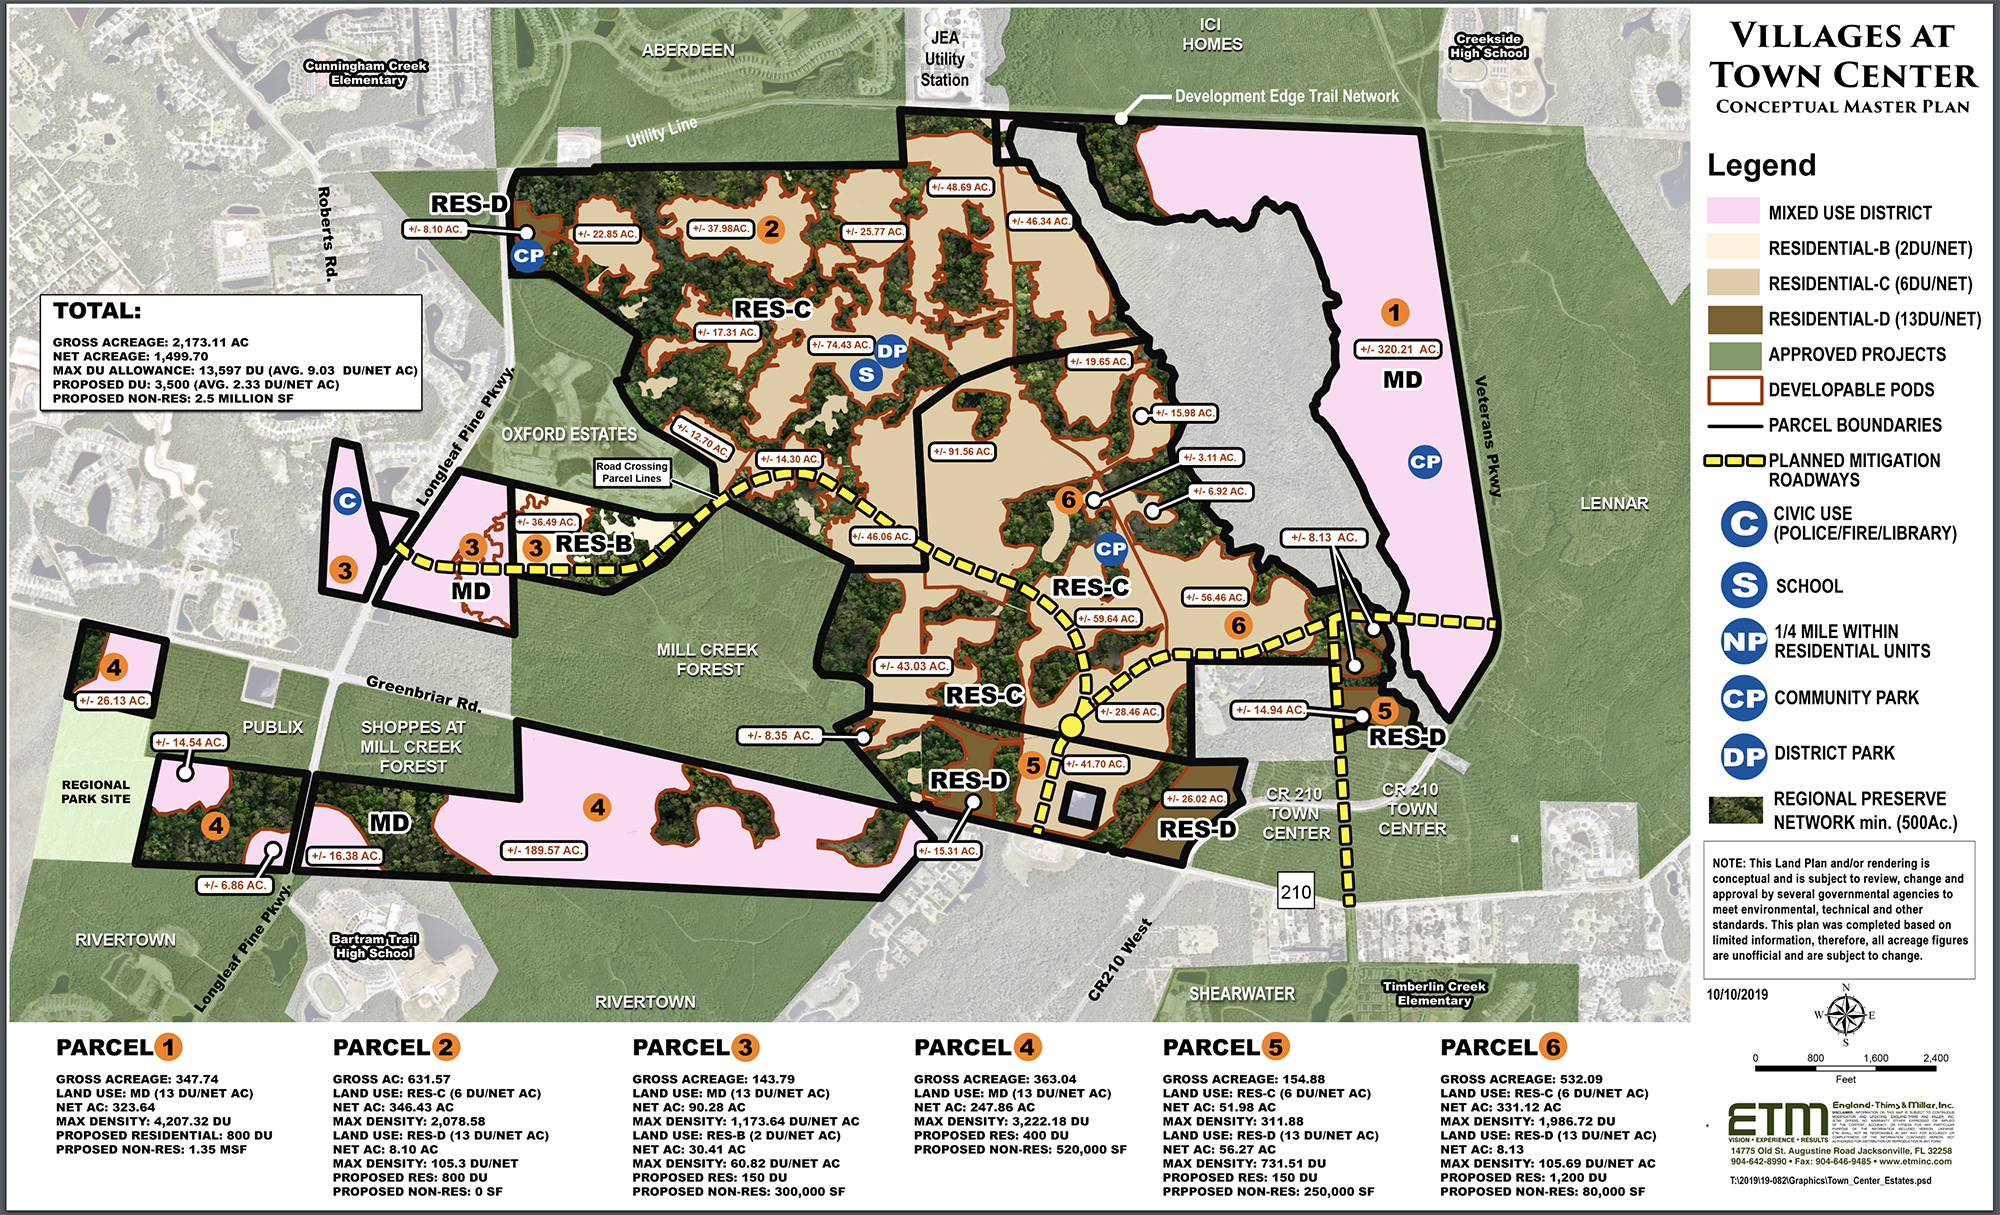 Villages at Town Center would include locations for parks, a school and civic uses.